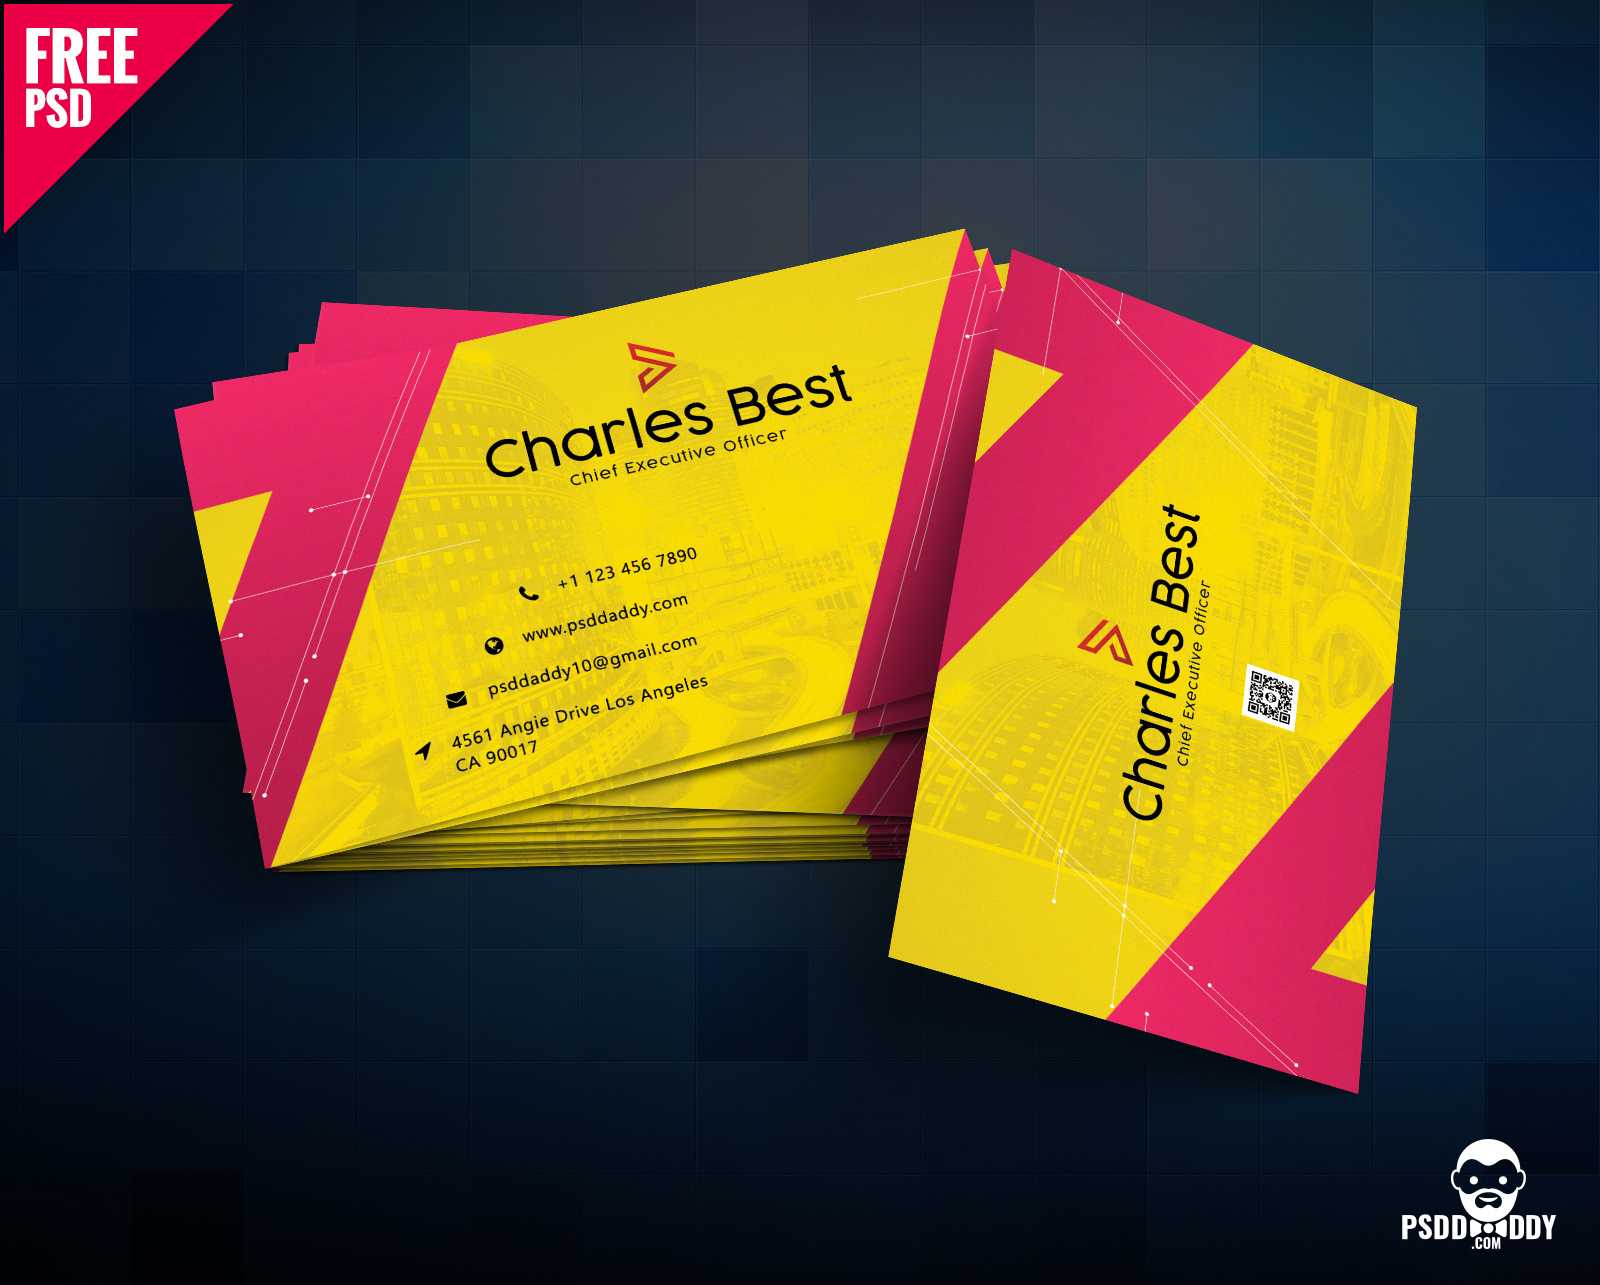 Download] Creative Business Card Free Psd | Psddaddy With Regard To Visiting Card Psd Template